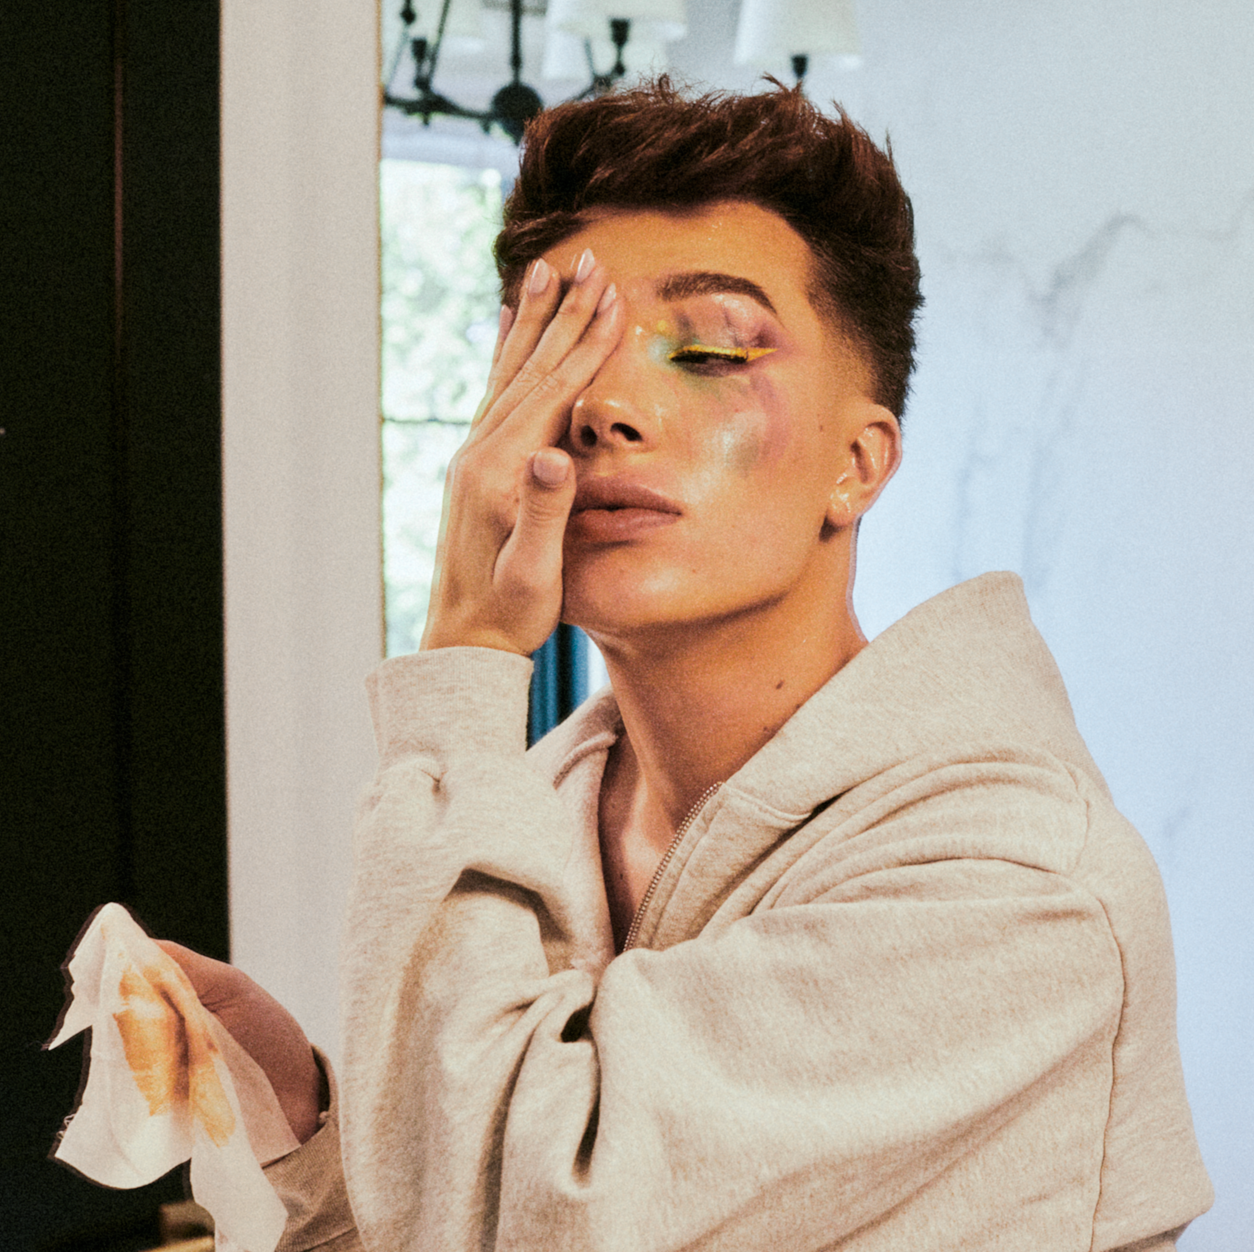 James Charles Would Like to Be Uncanceled, Please